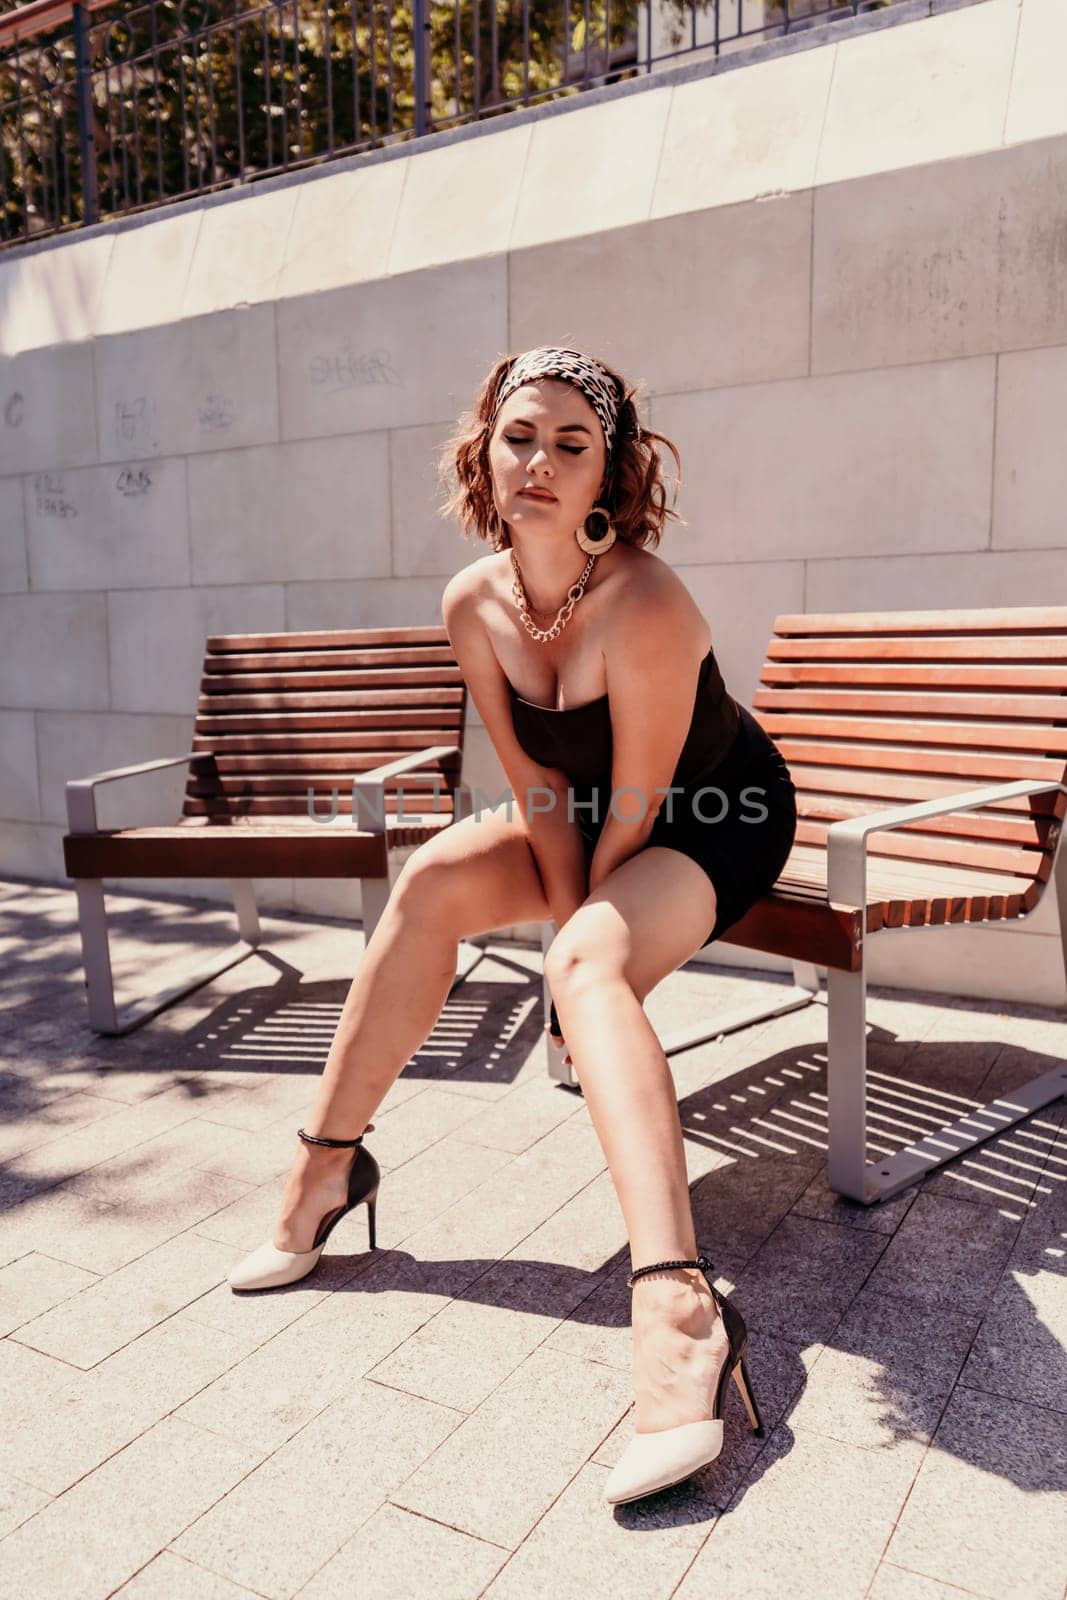 Portrait of a woman on the street. An attractive woman in a black dress is sitting on a bench outside